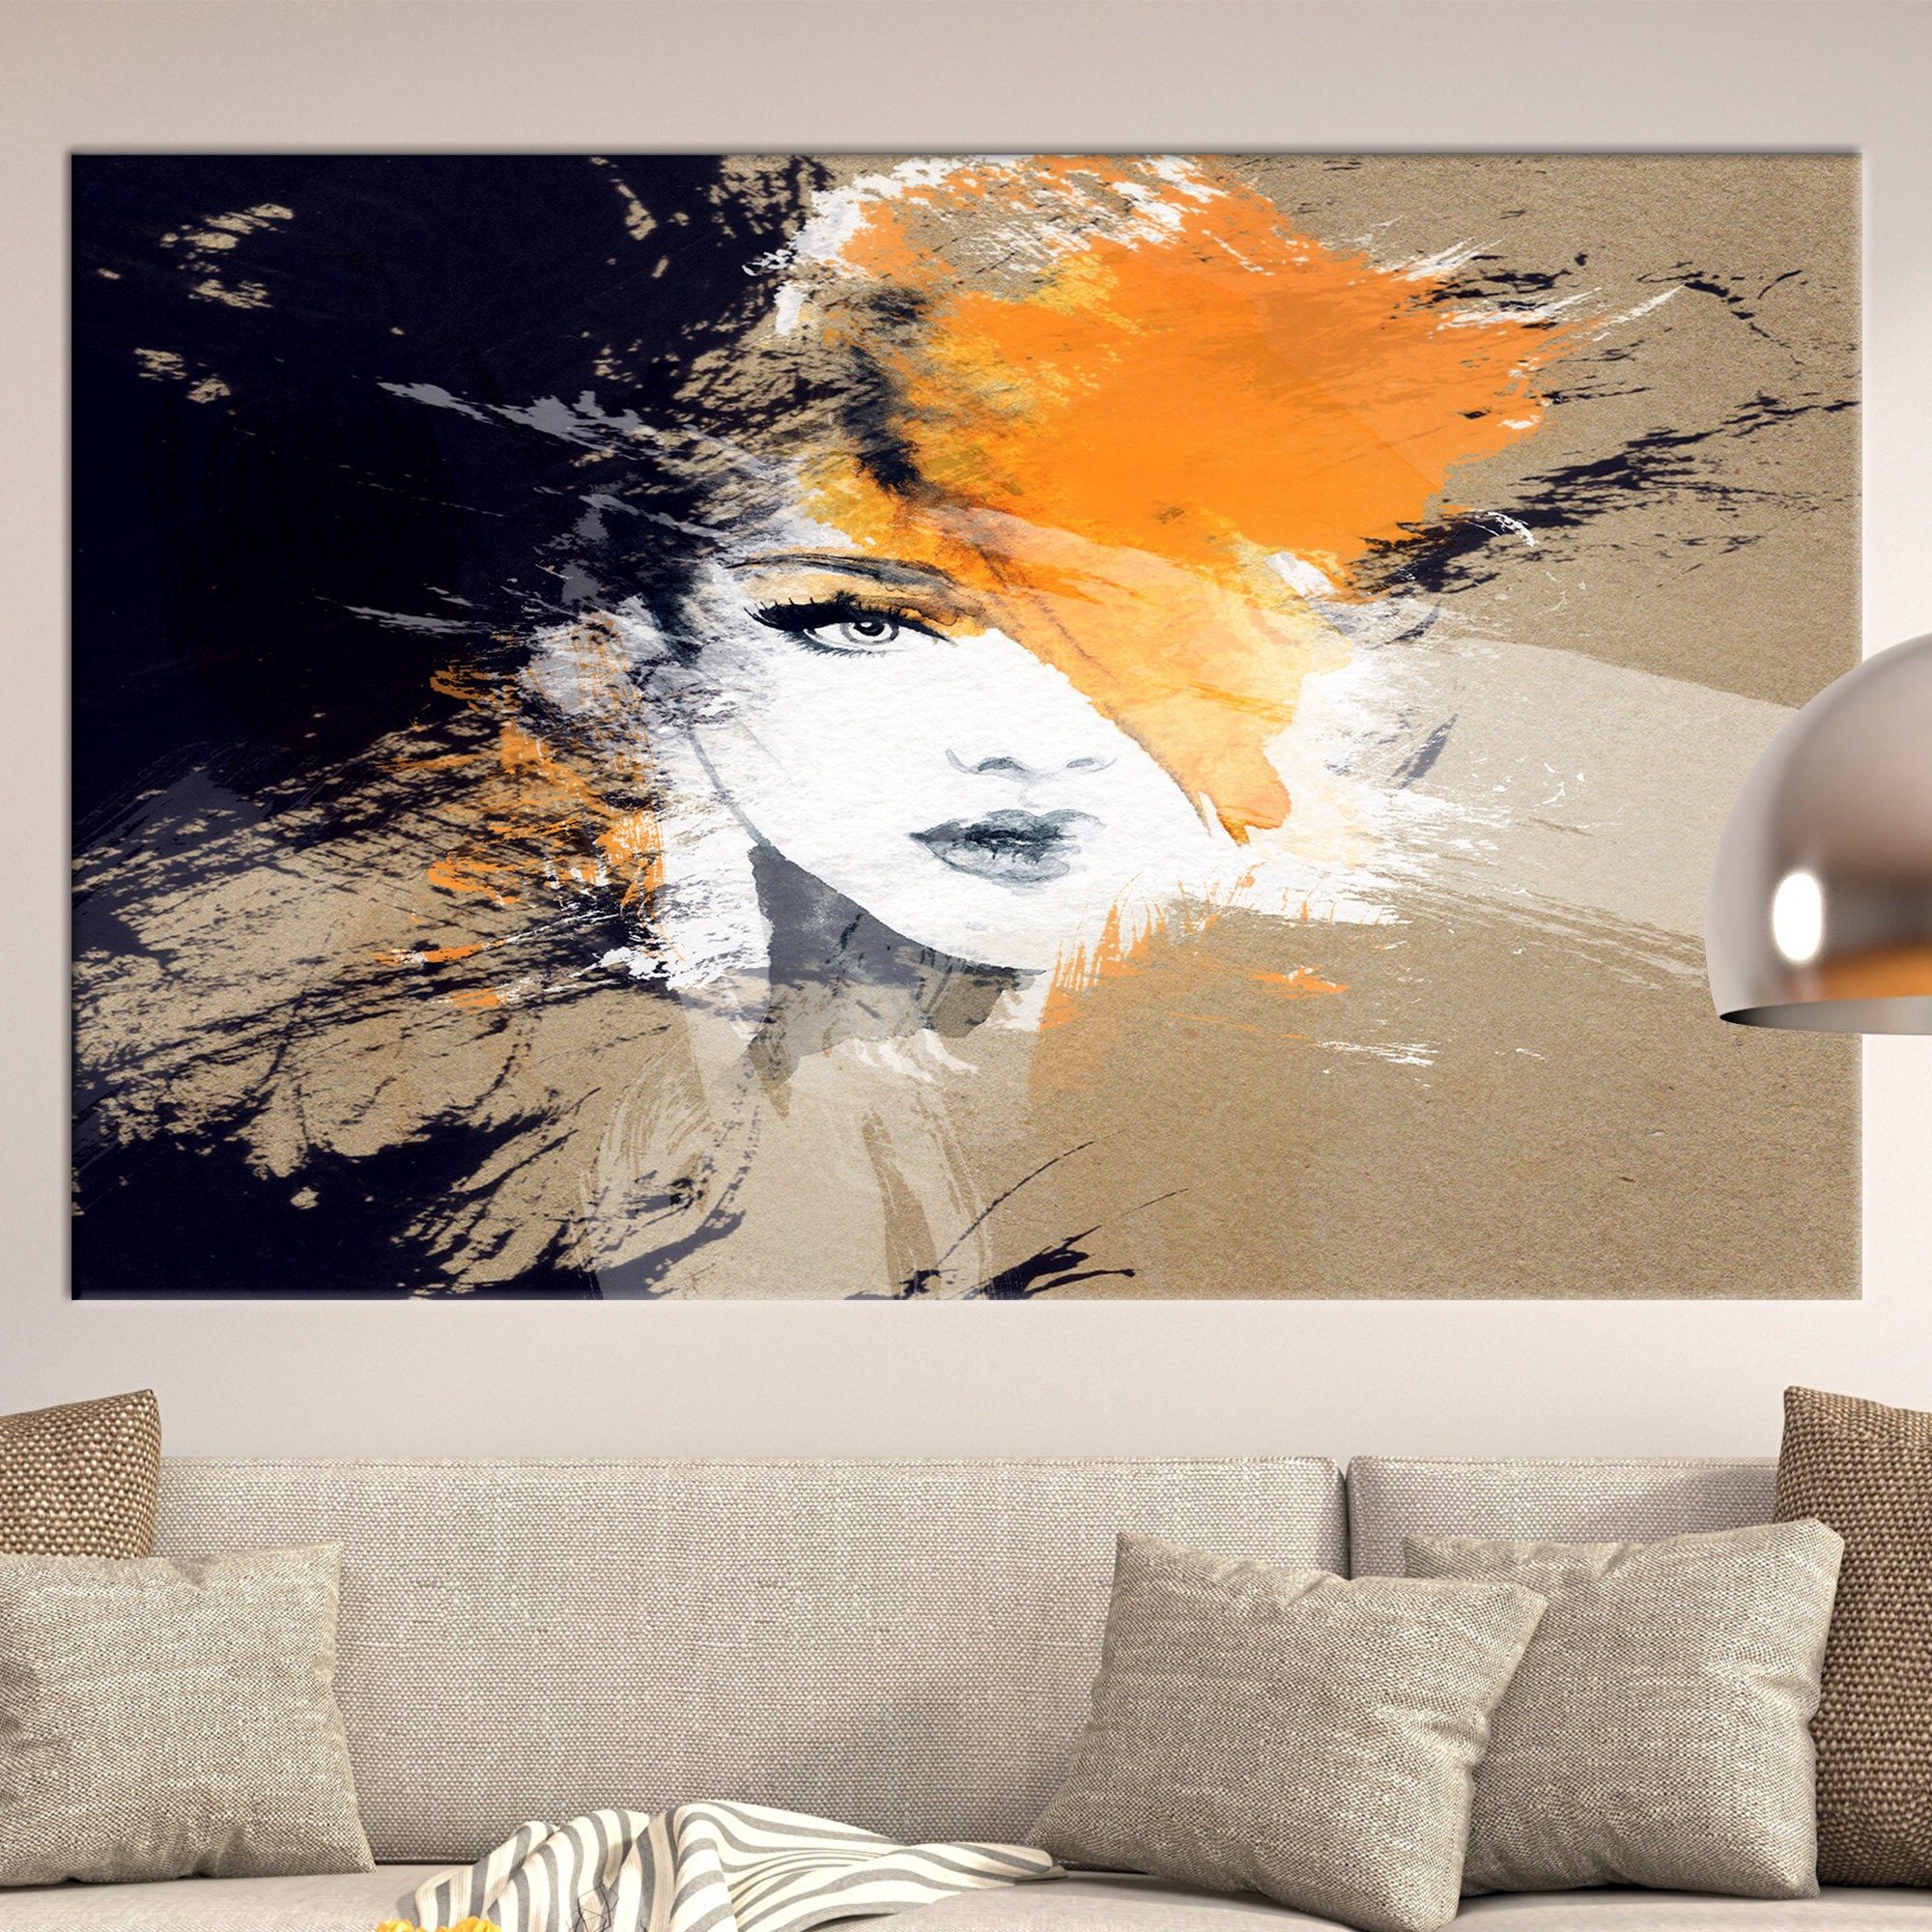 Woman Face Wall Art – Etsy Throughout Latest Women Face Wall Art (View 14 of 15)